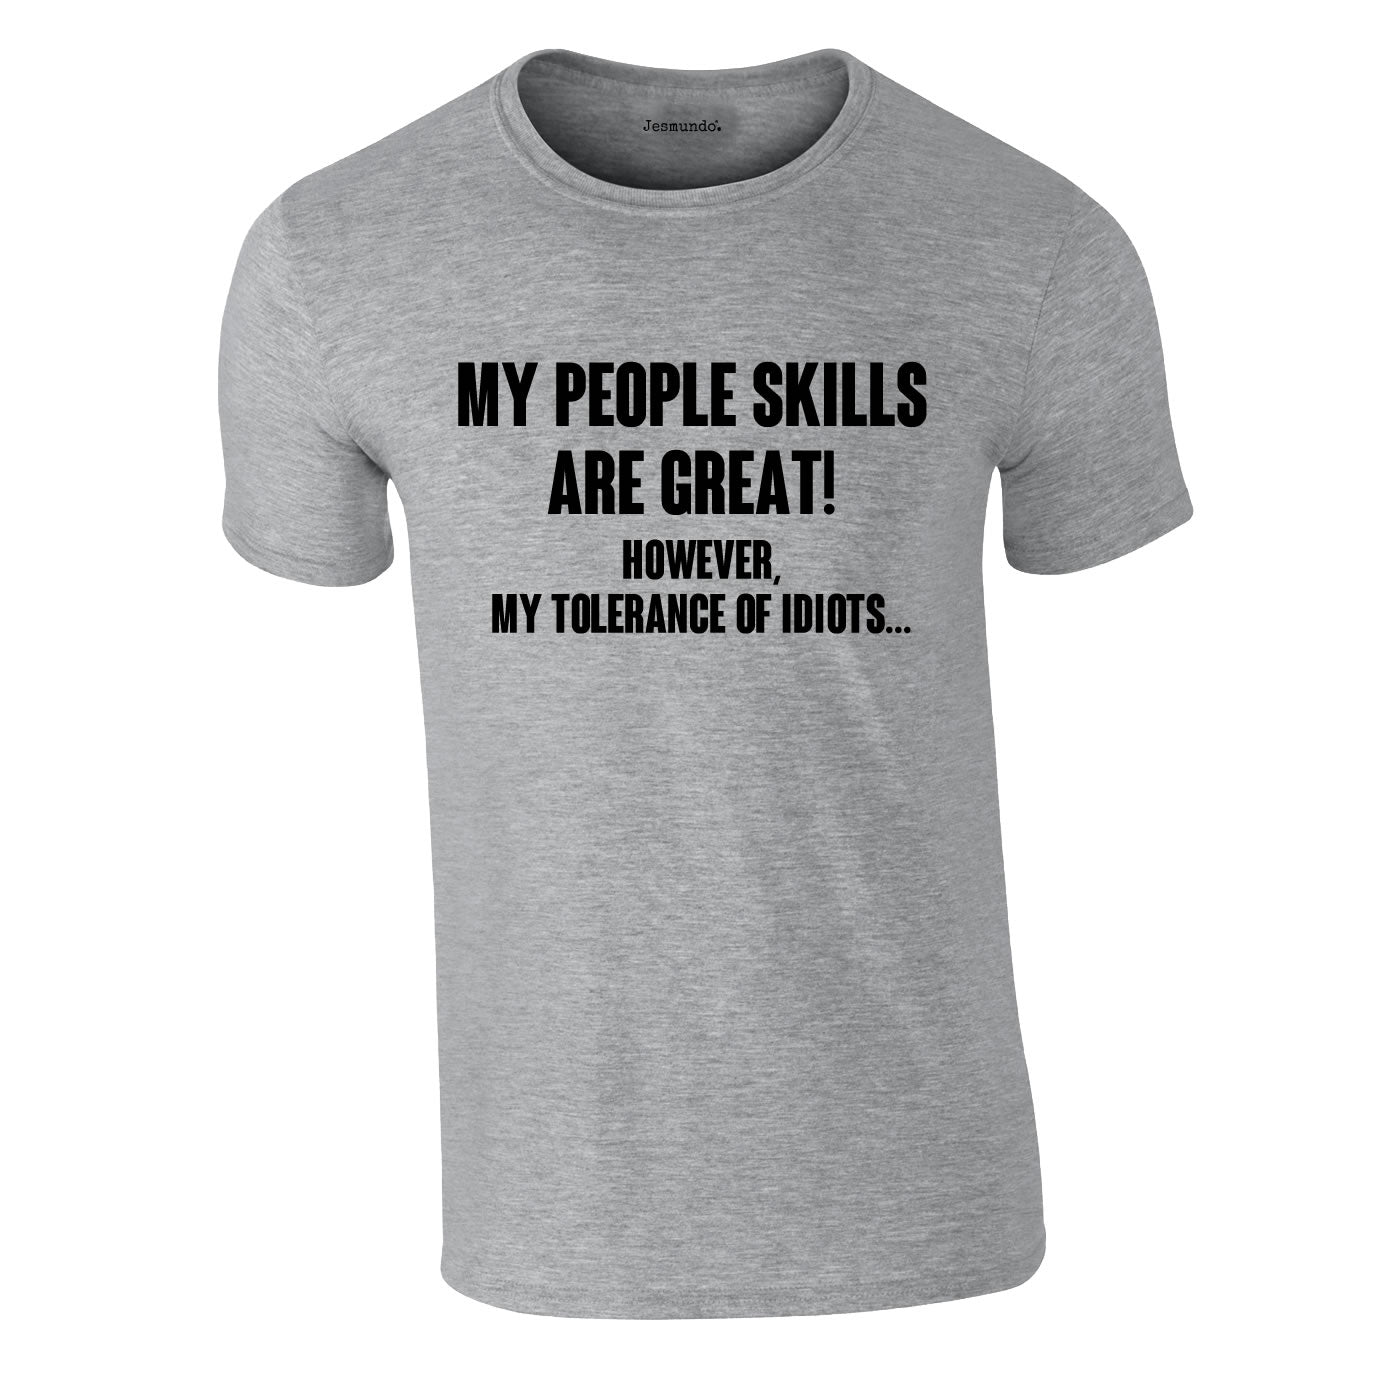 My People Skills Are Great. However My Tolerance Of Idiots...T Shirt